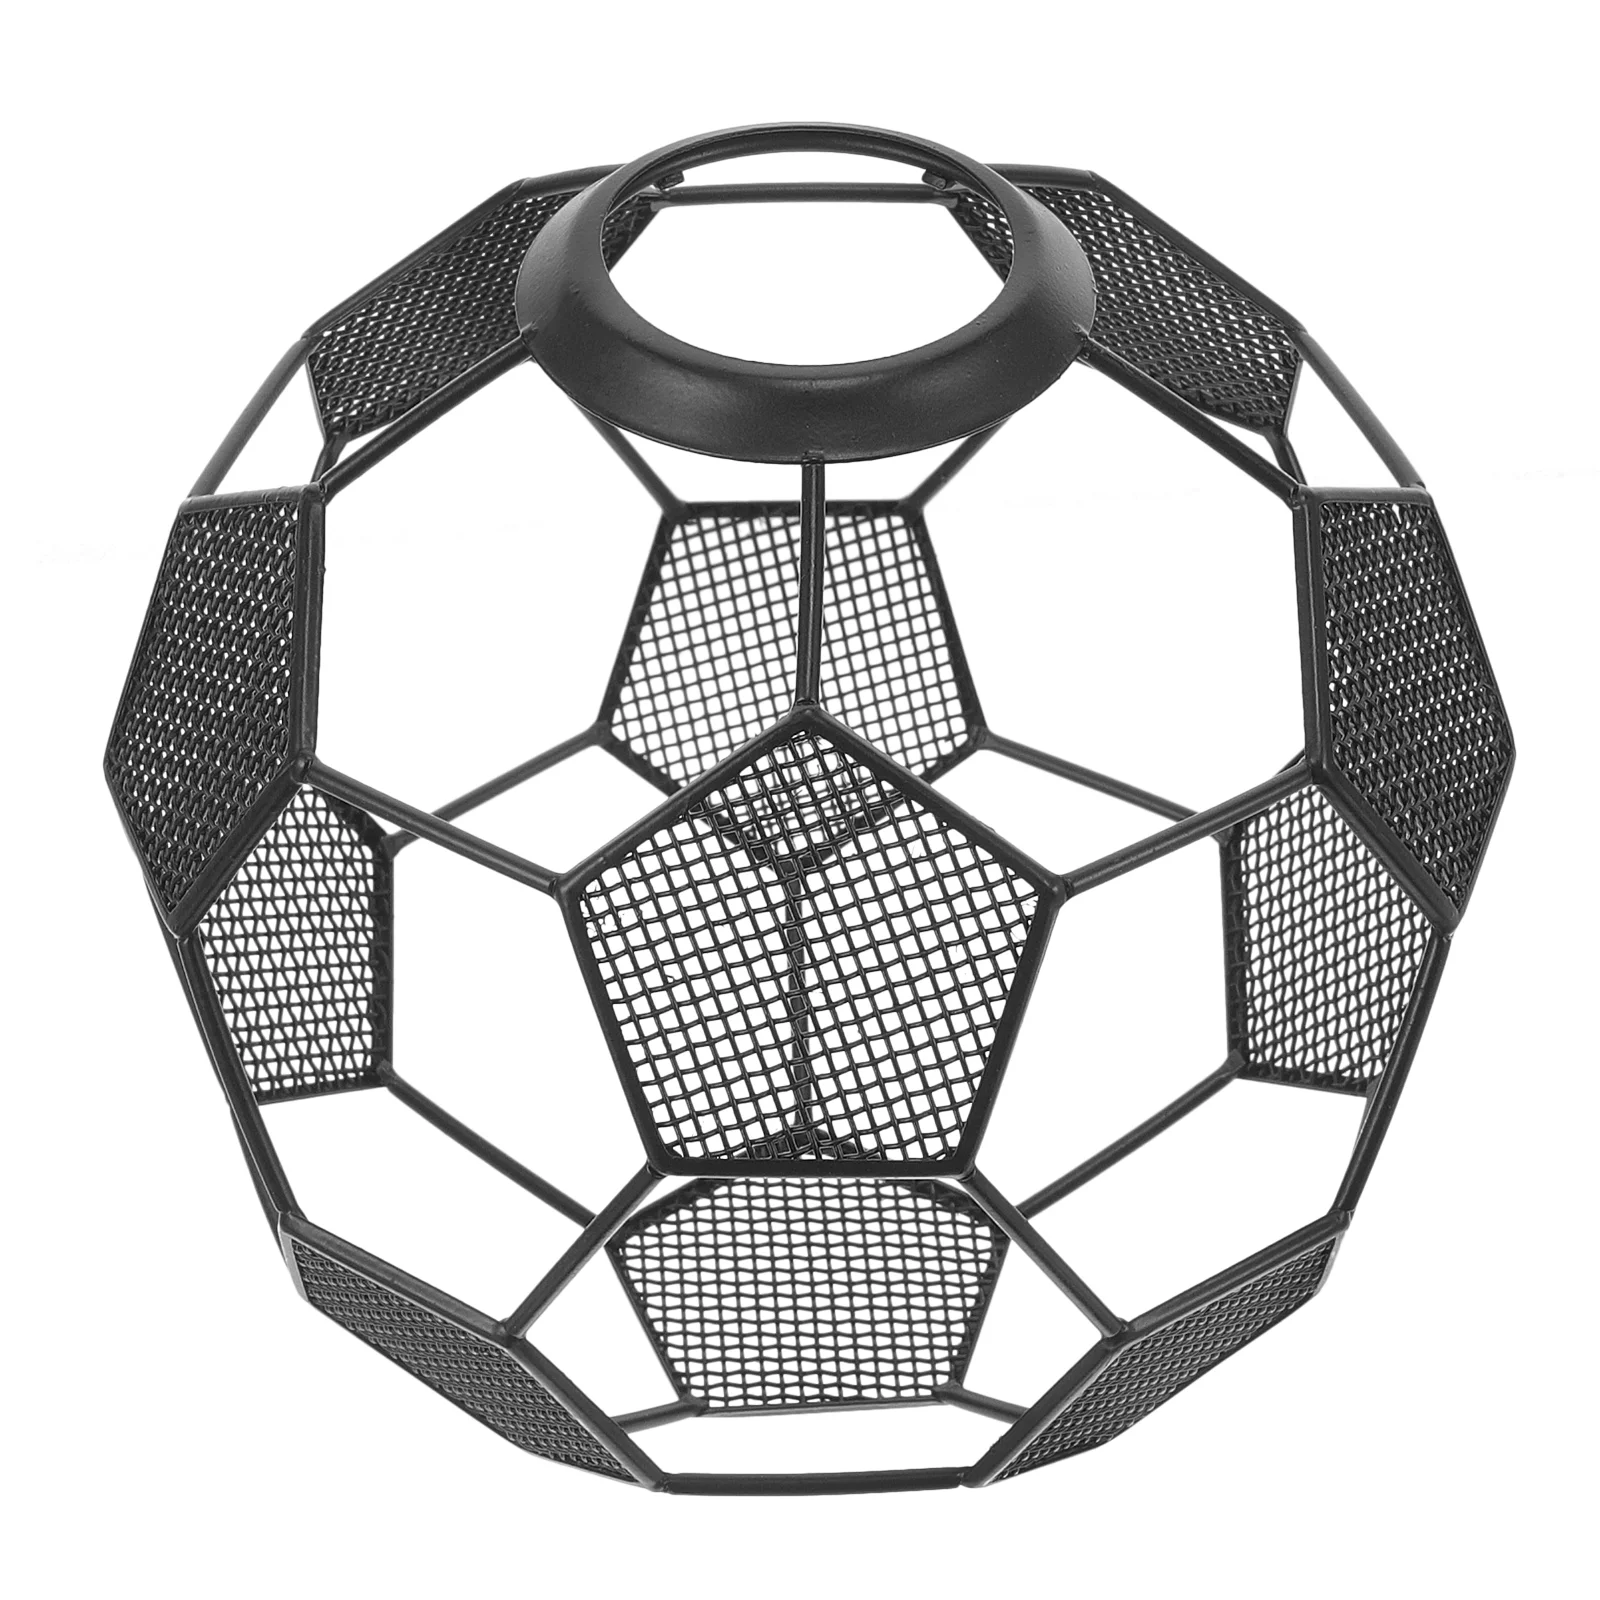 Football Lampshade Modern Fine Chandelier Light Covers Wire Stainless Steel Decorative Retro 2 in 1 soccer rebounder football goal 202x104x120 cm steel